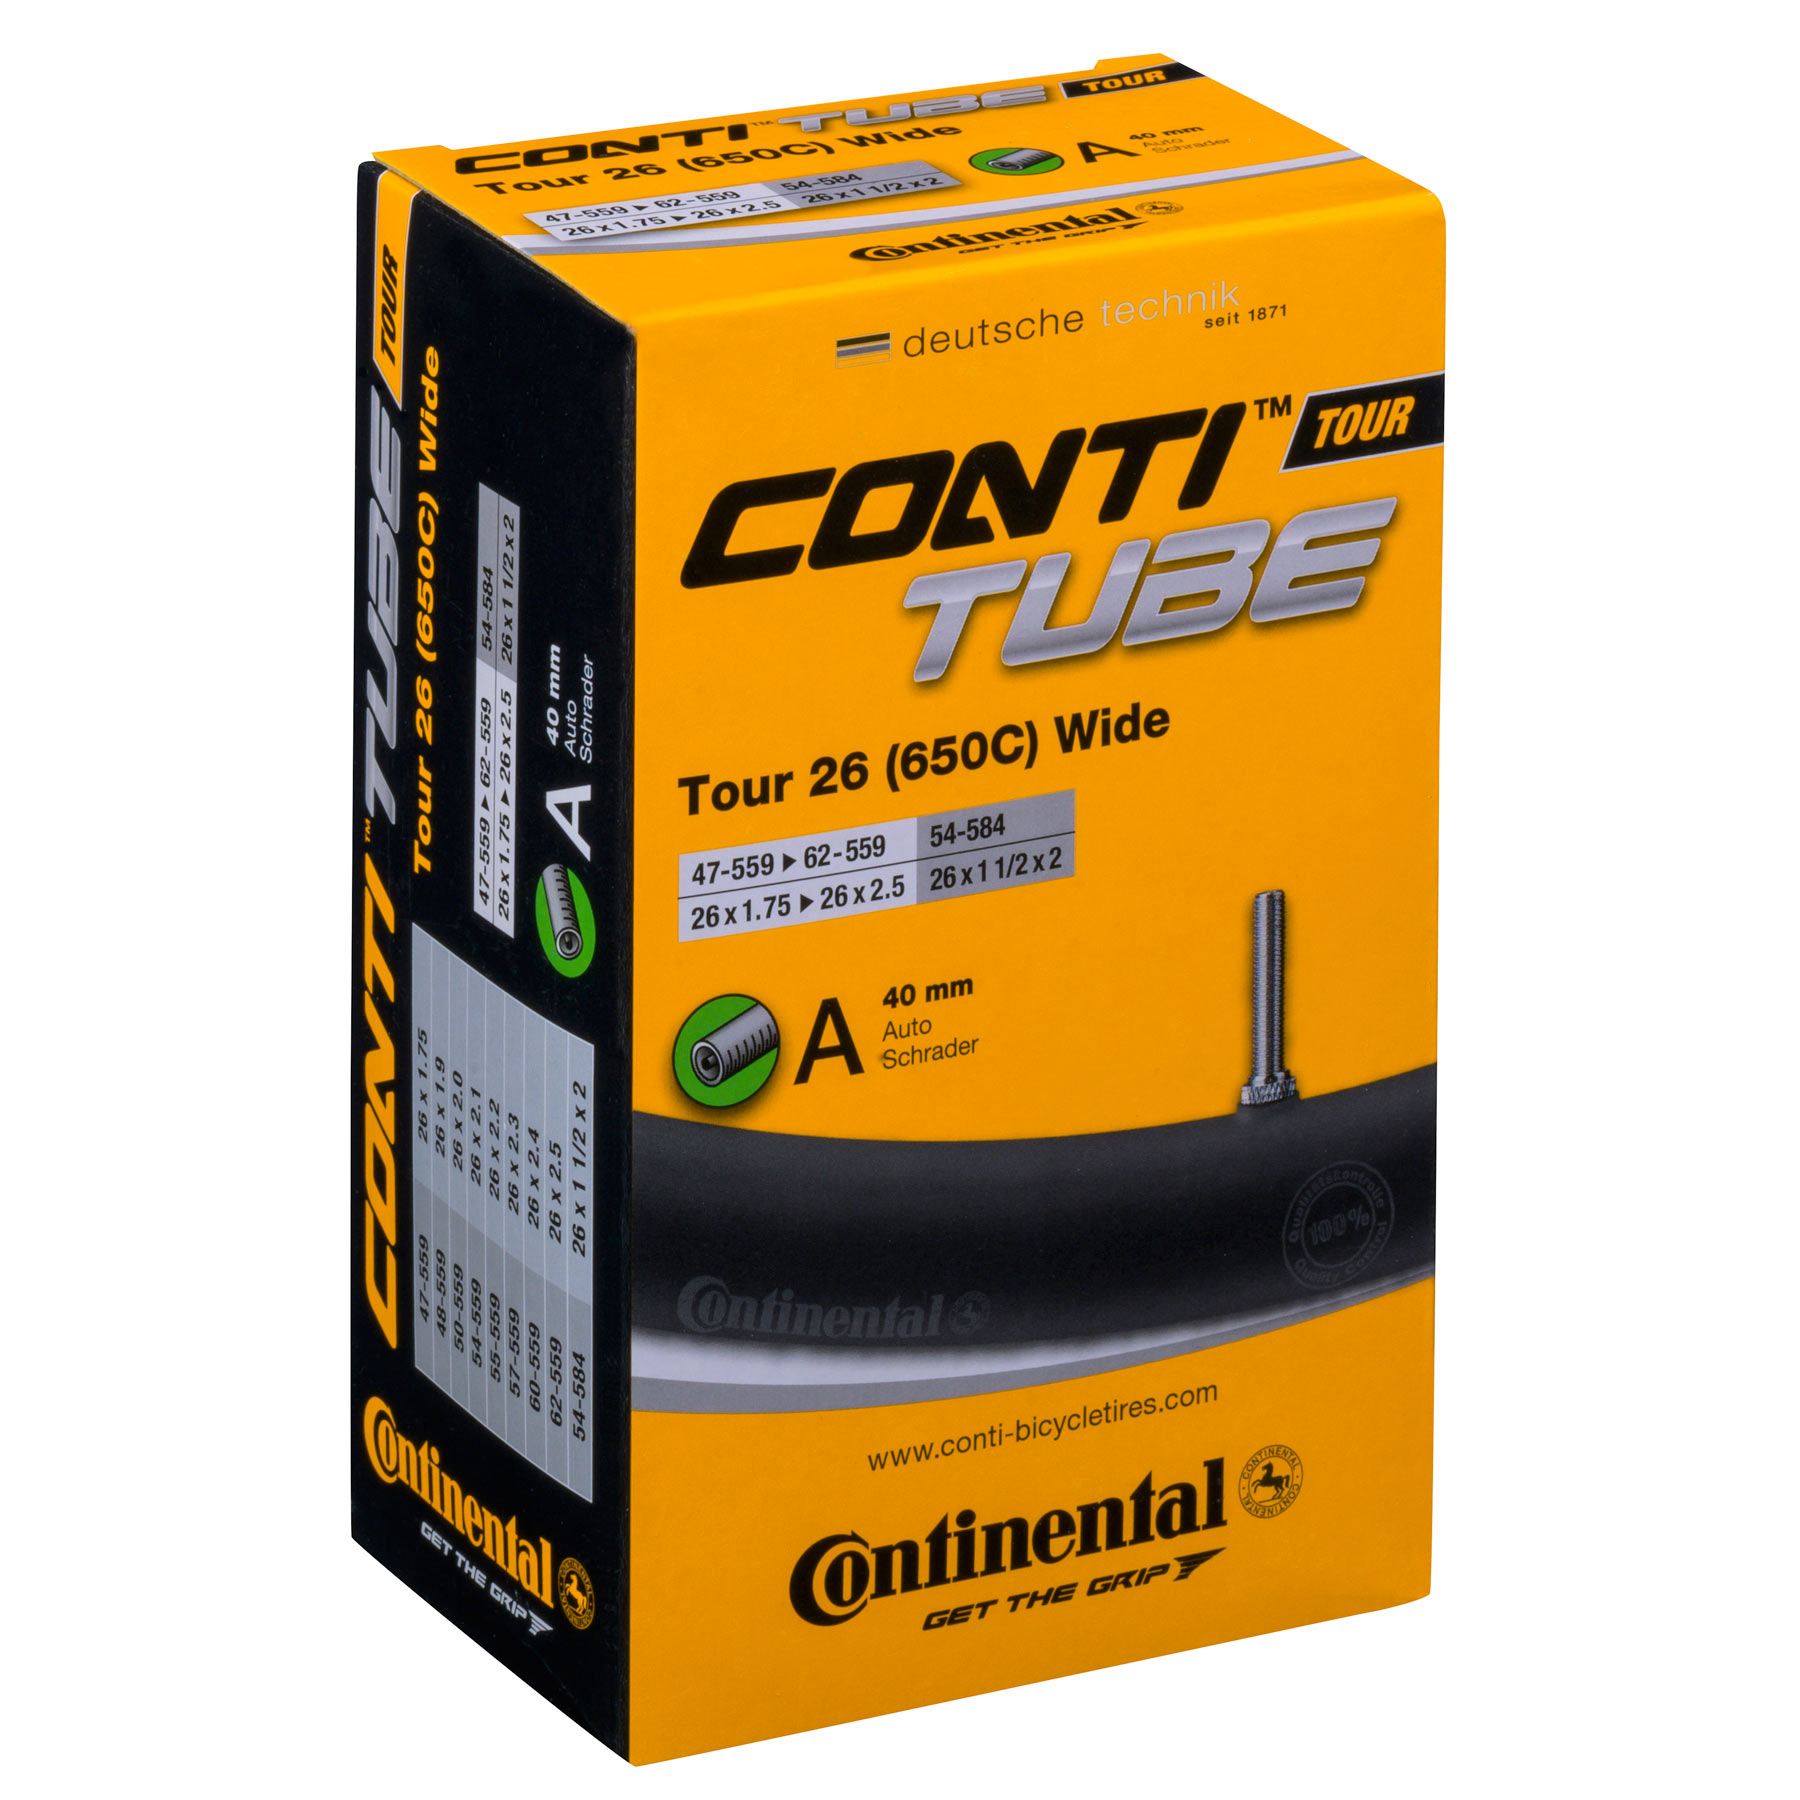 Picture of Continental Tour 26 Wide Tube